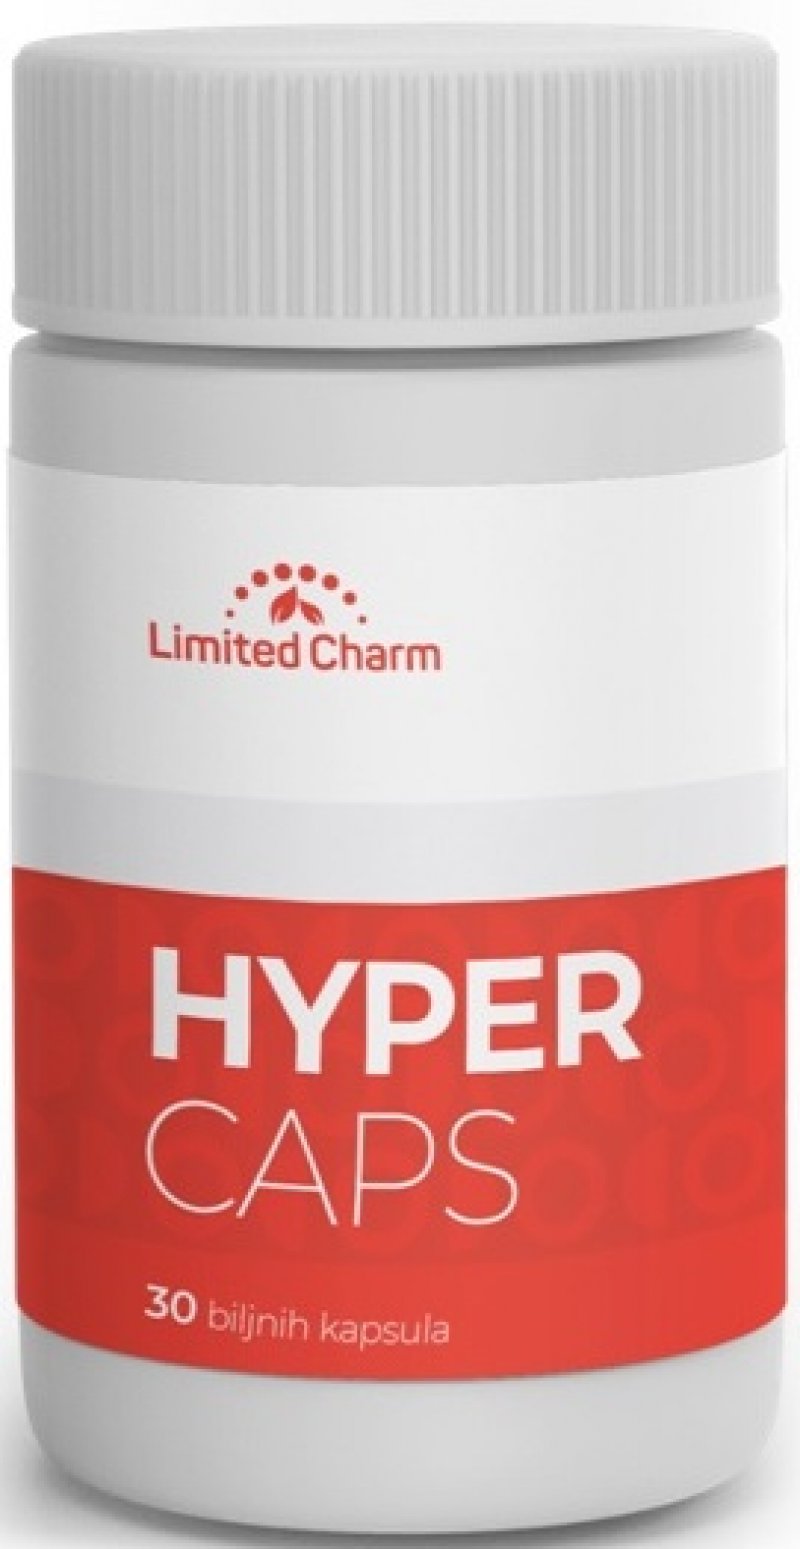 hypercaps-limited-charm